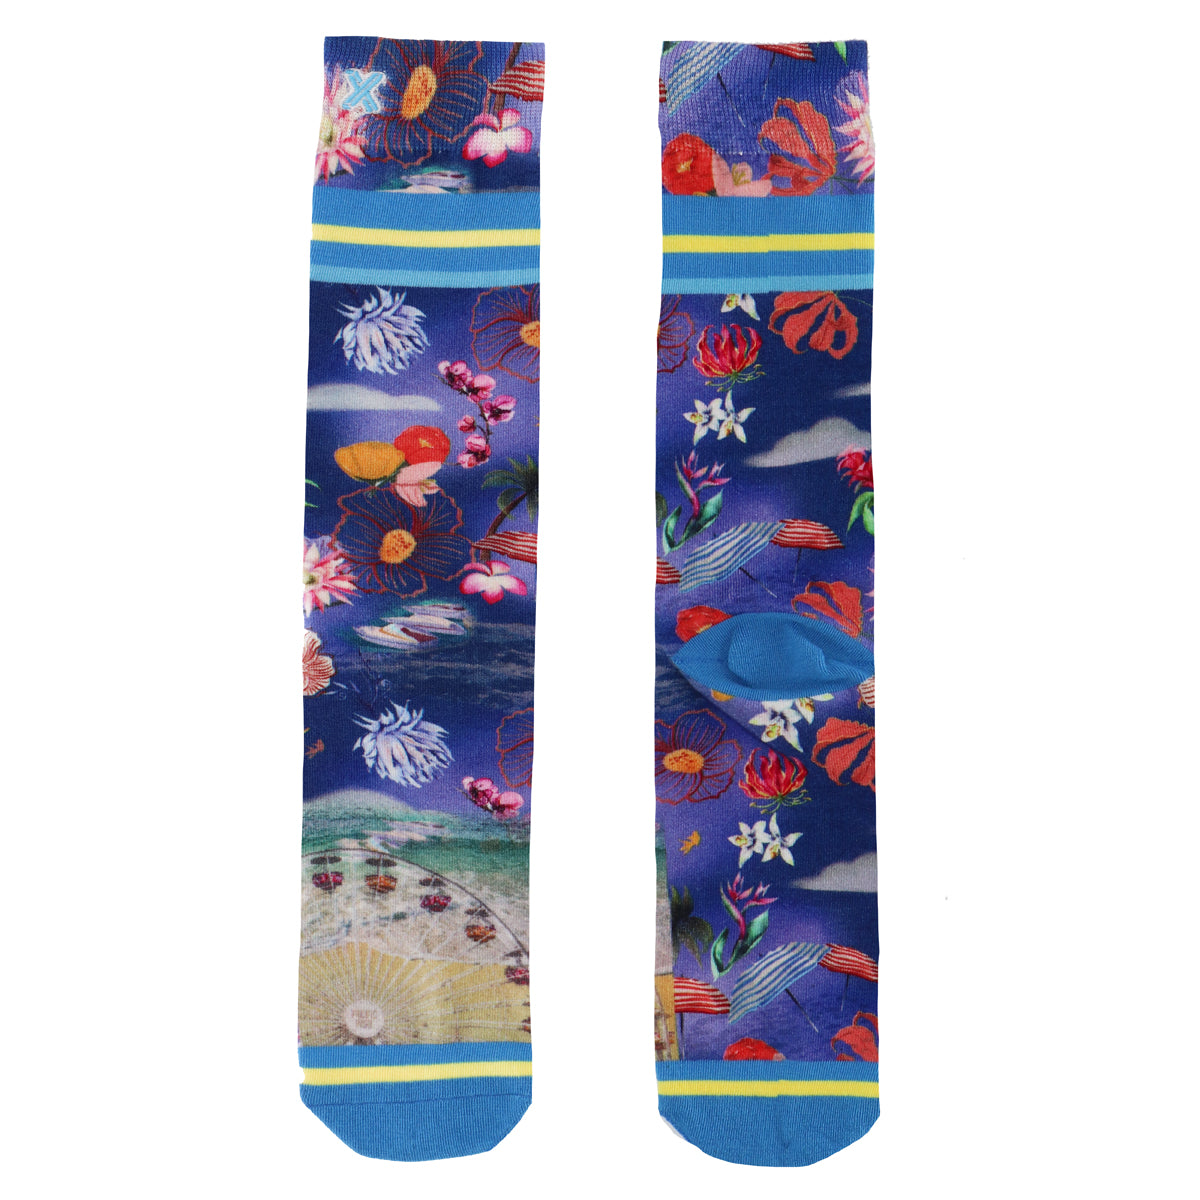 Xpooos & ADNF Tropical Set Bamboo Men's chaussettes pour hommes